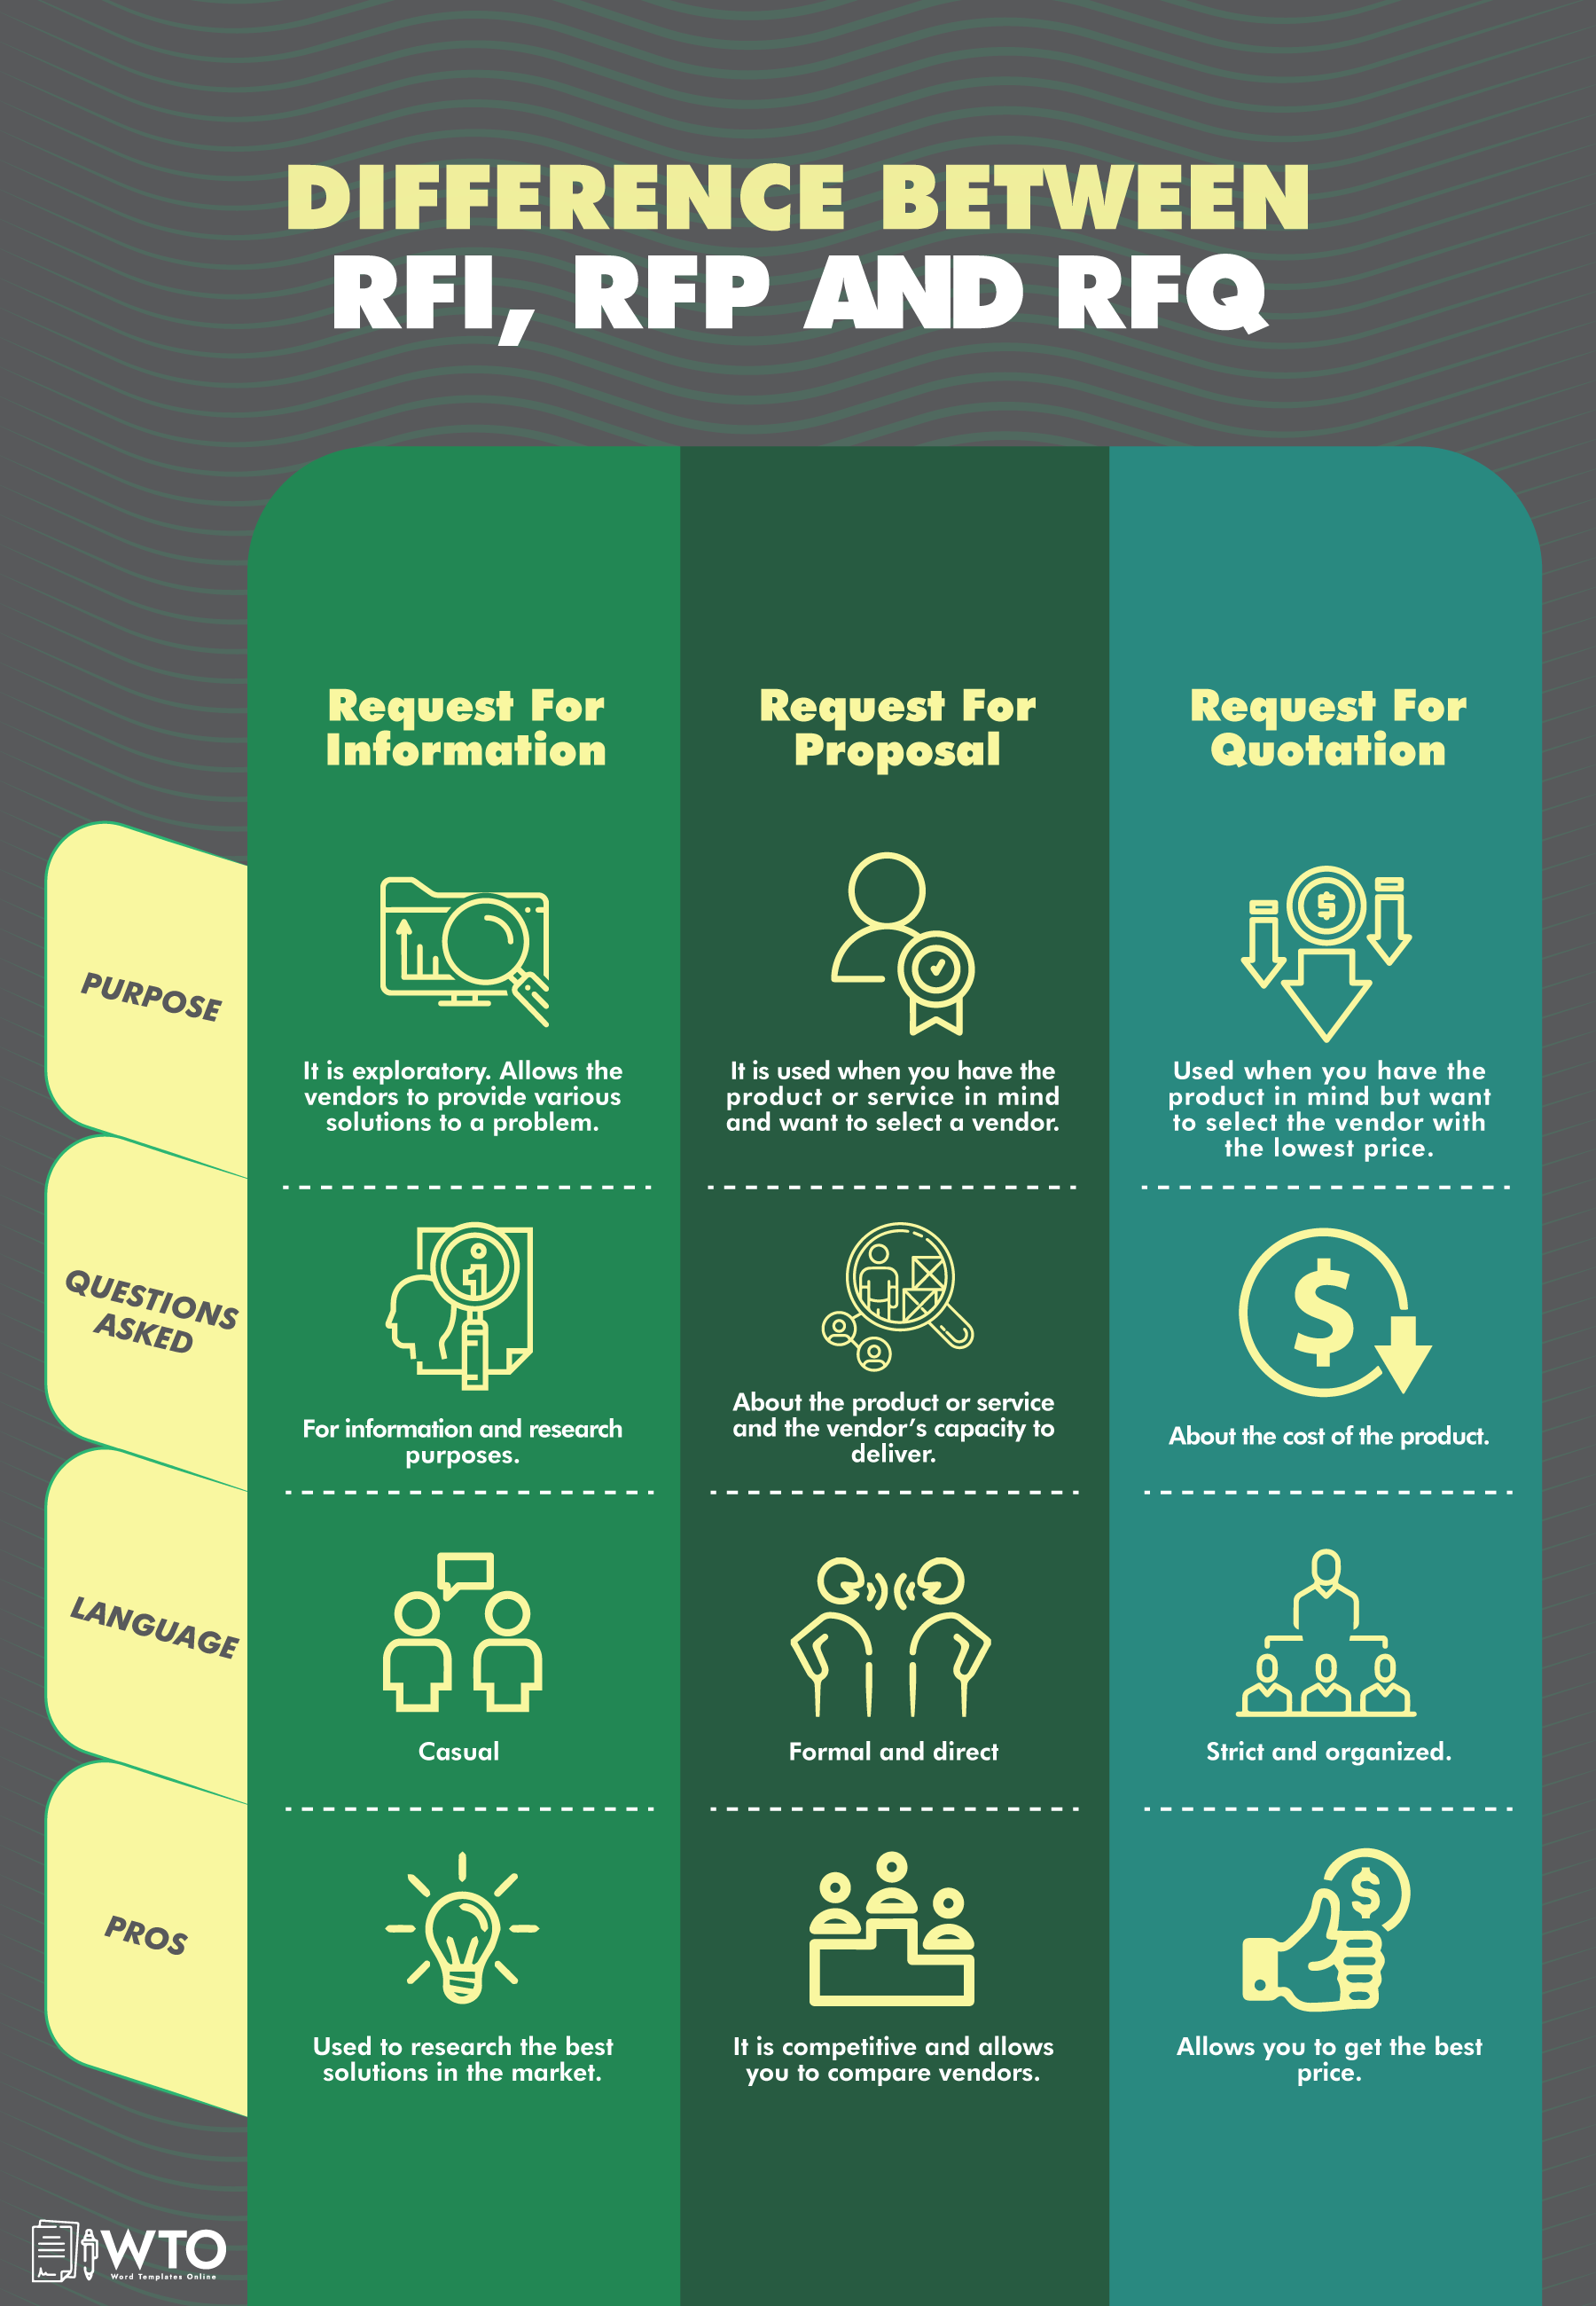 This infographic is about the difference between RFI, RFP and RFQ.